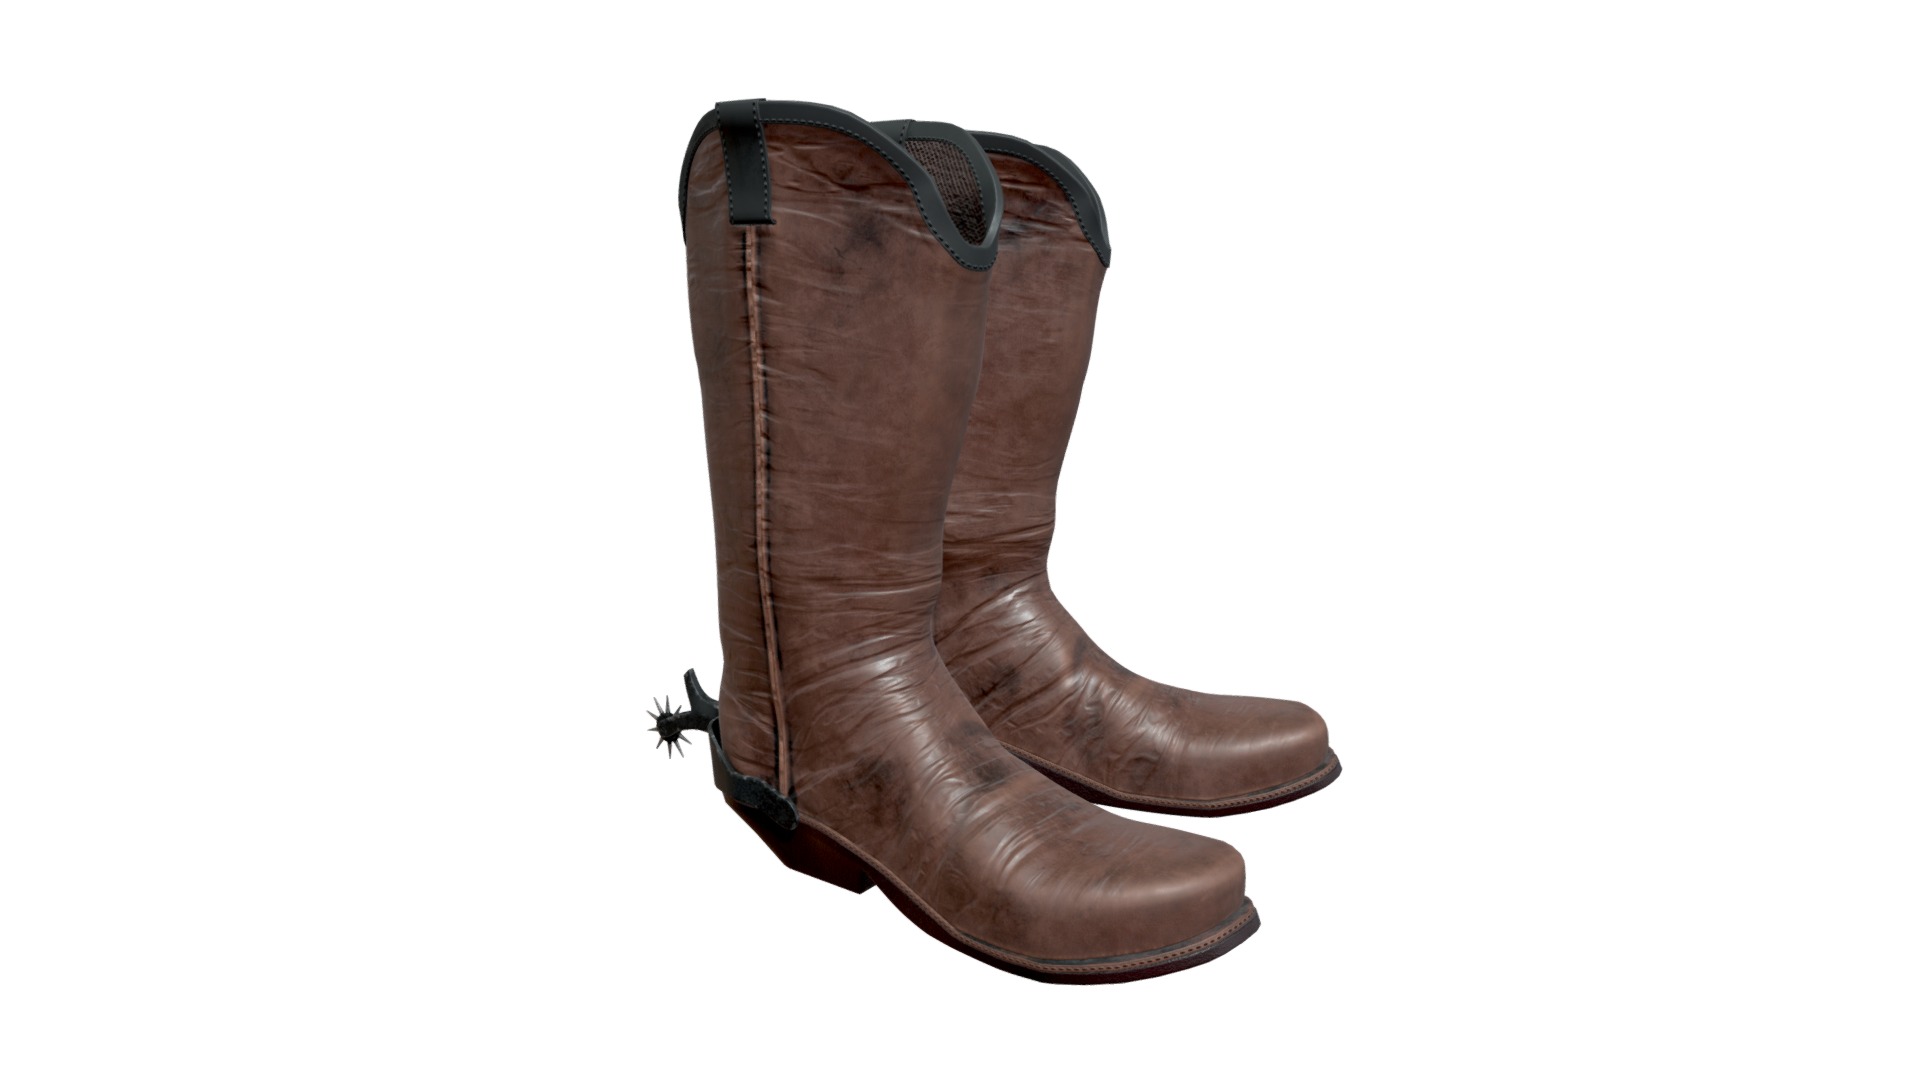 3D model Leather cowboy boots - This is a 3D model of the Leather cowboy boots. The 3D model is about a brown leather boot.